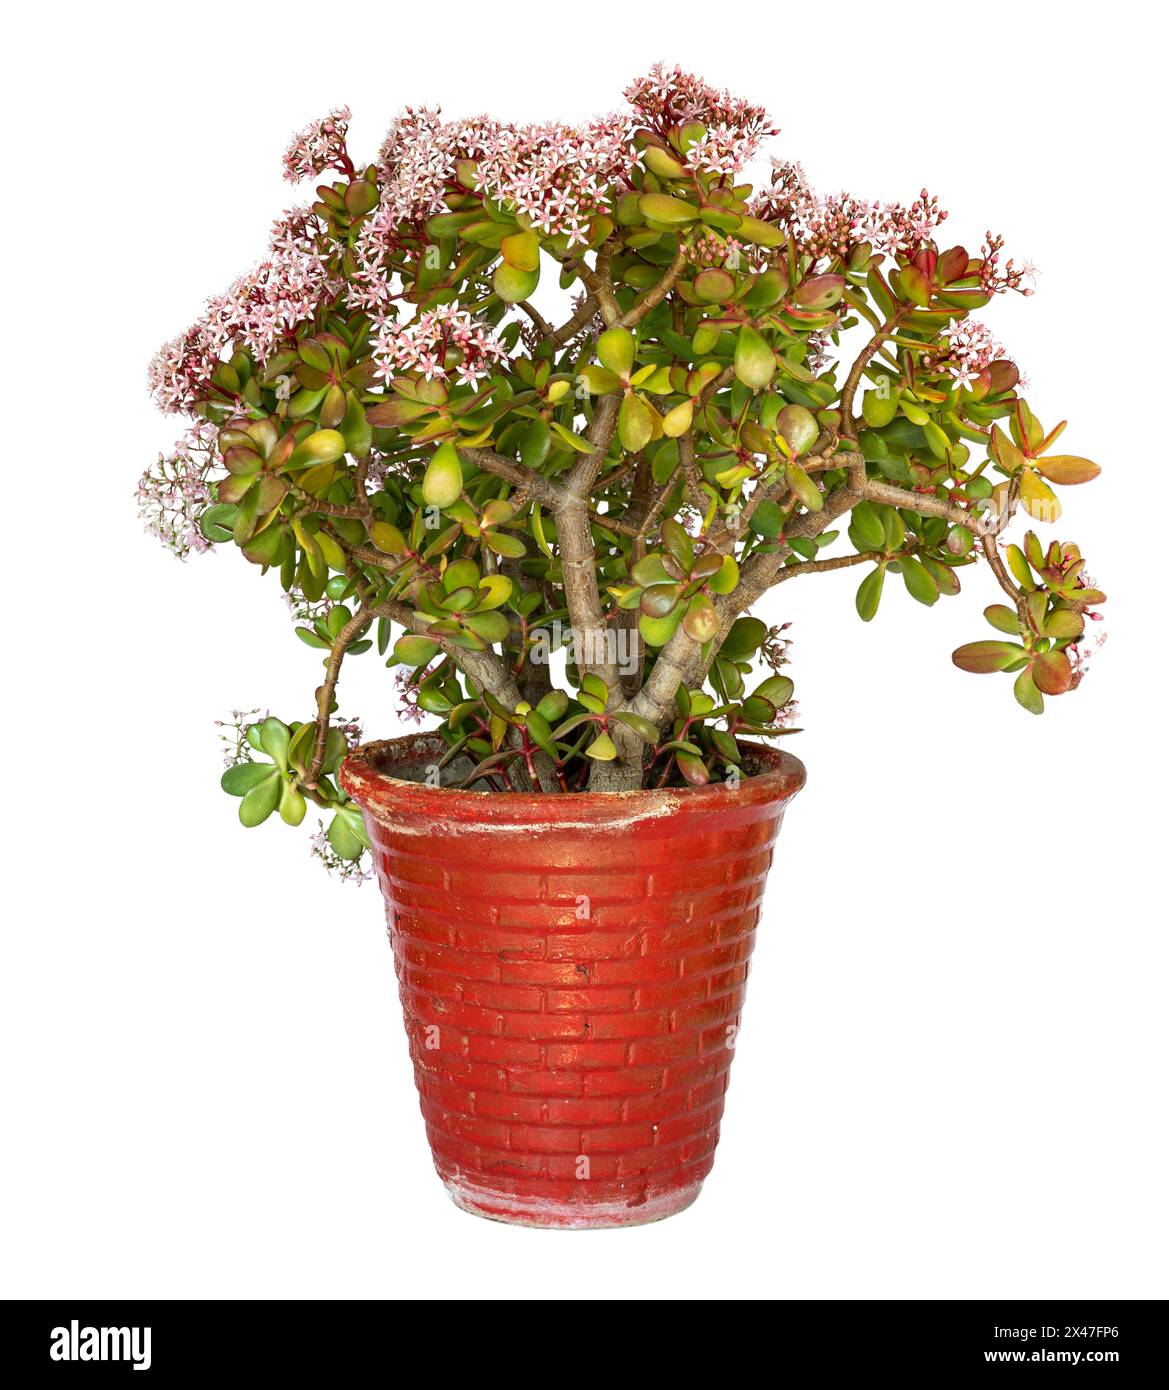 Crassula Ovata jade blooming plant in red flowerpot isolated on white background Stock Photo